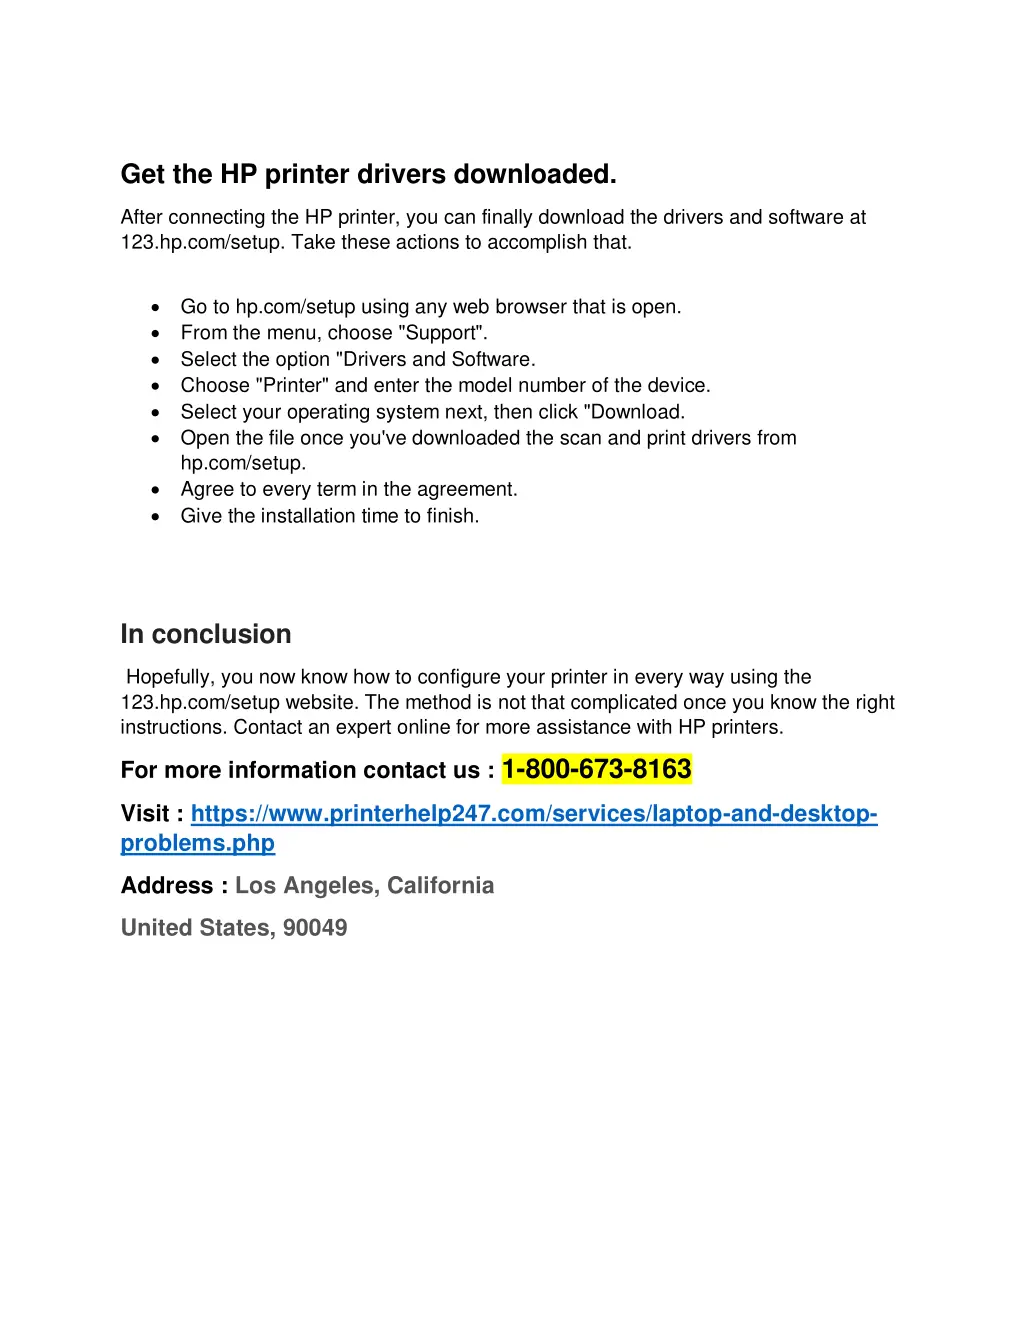 get the hp printer drivers downloaded